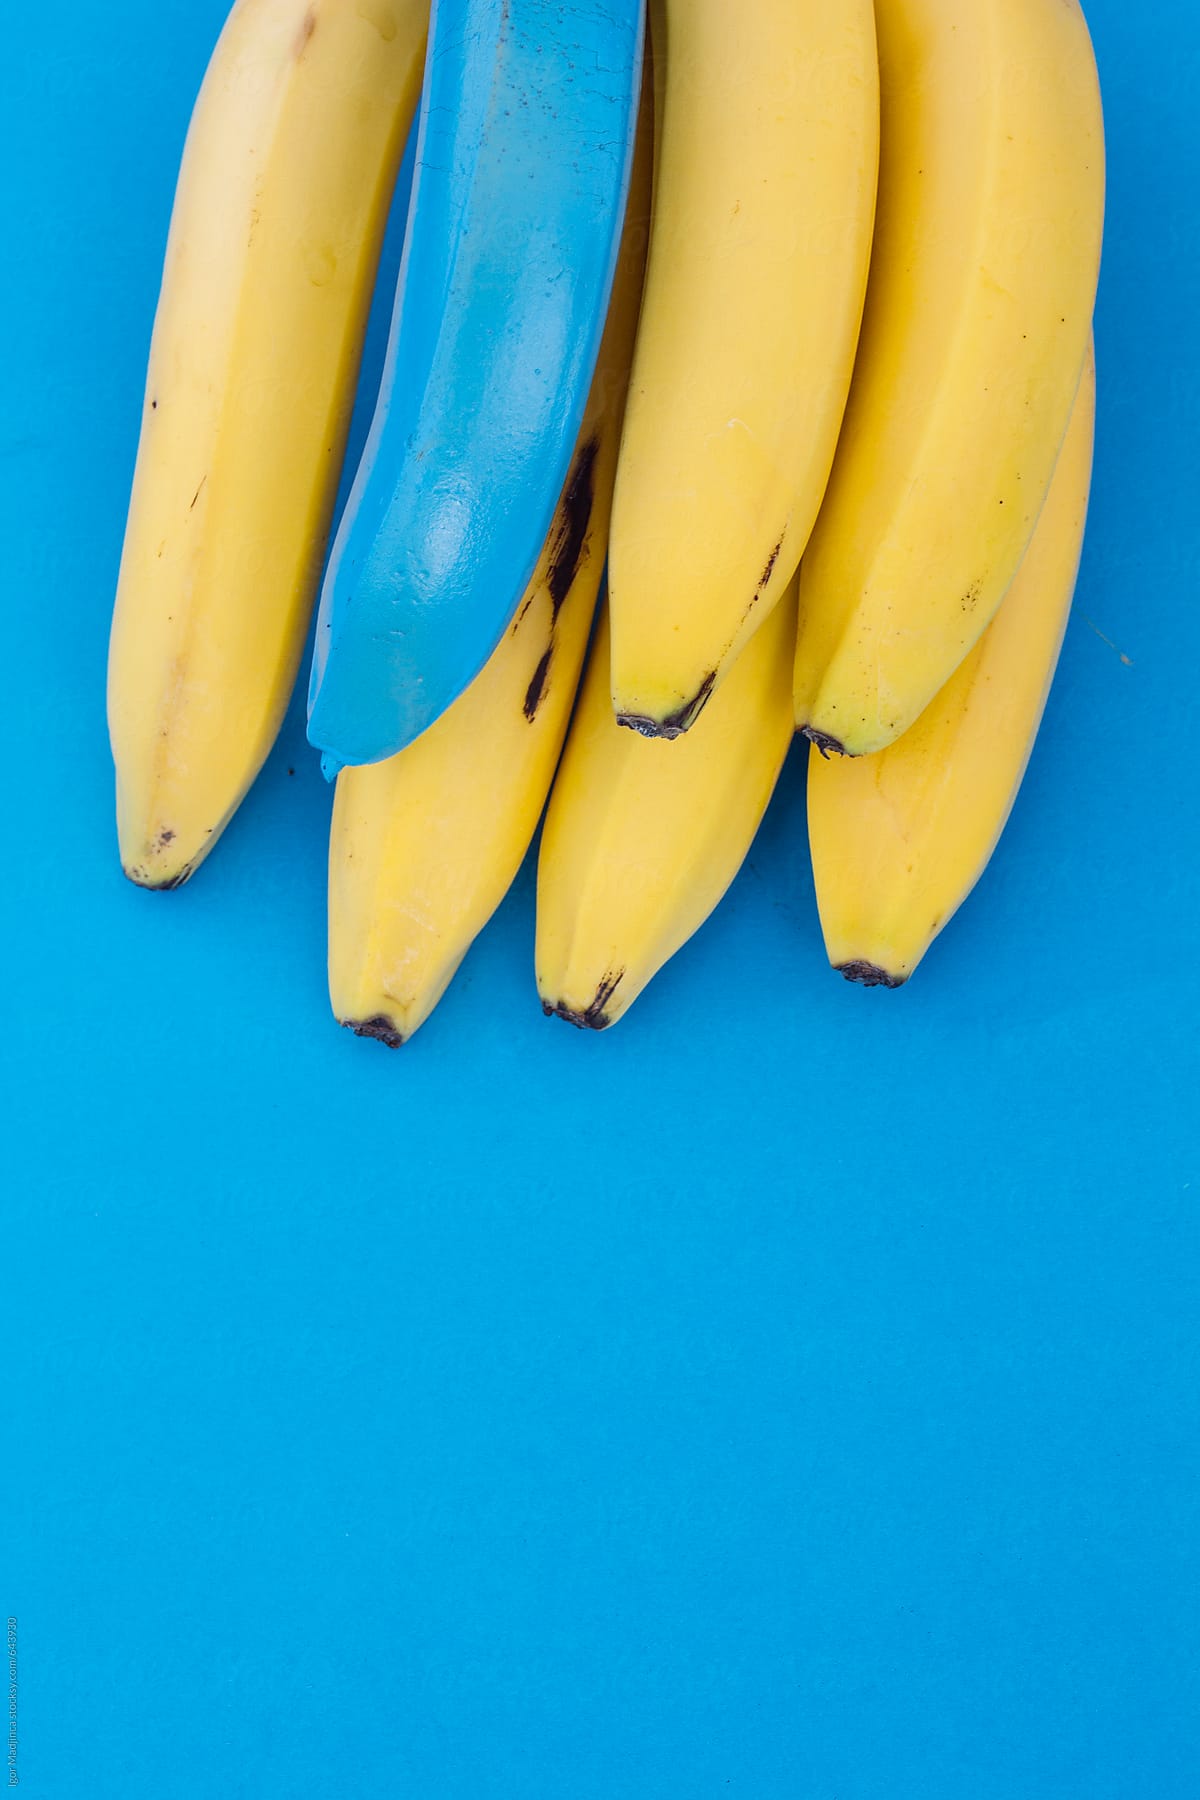 Cluster Of Yellow Bananas On A Blue Background And One Blue by Stocksy  Contributor Igor Madjinca - Stocksy